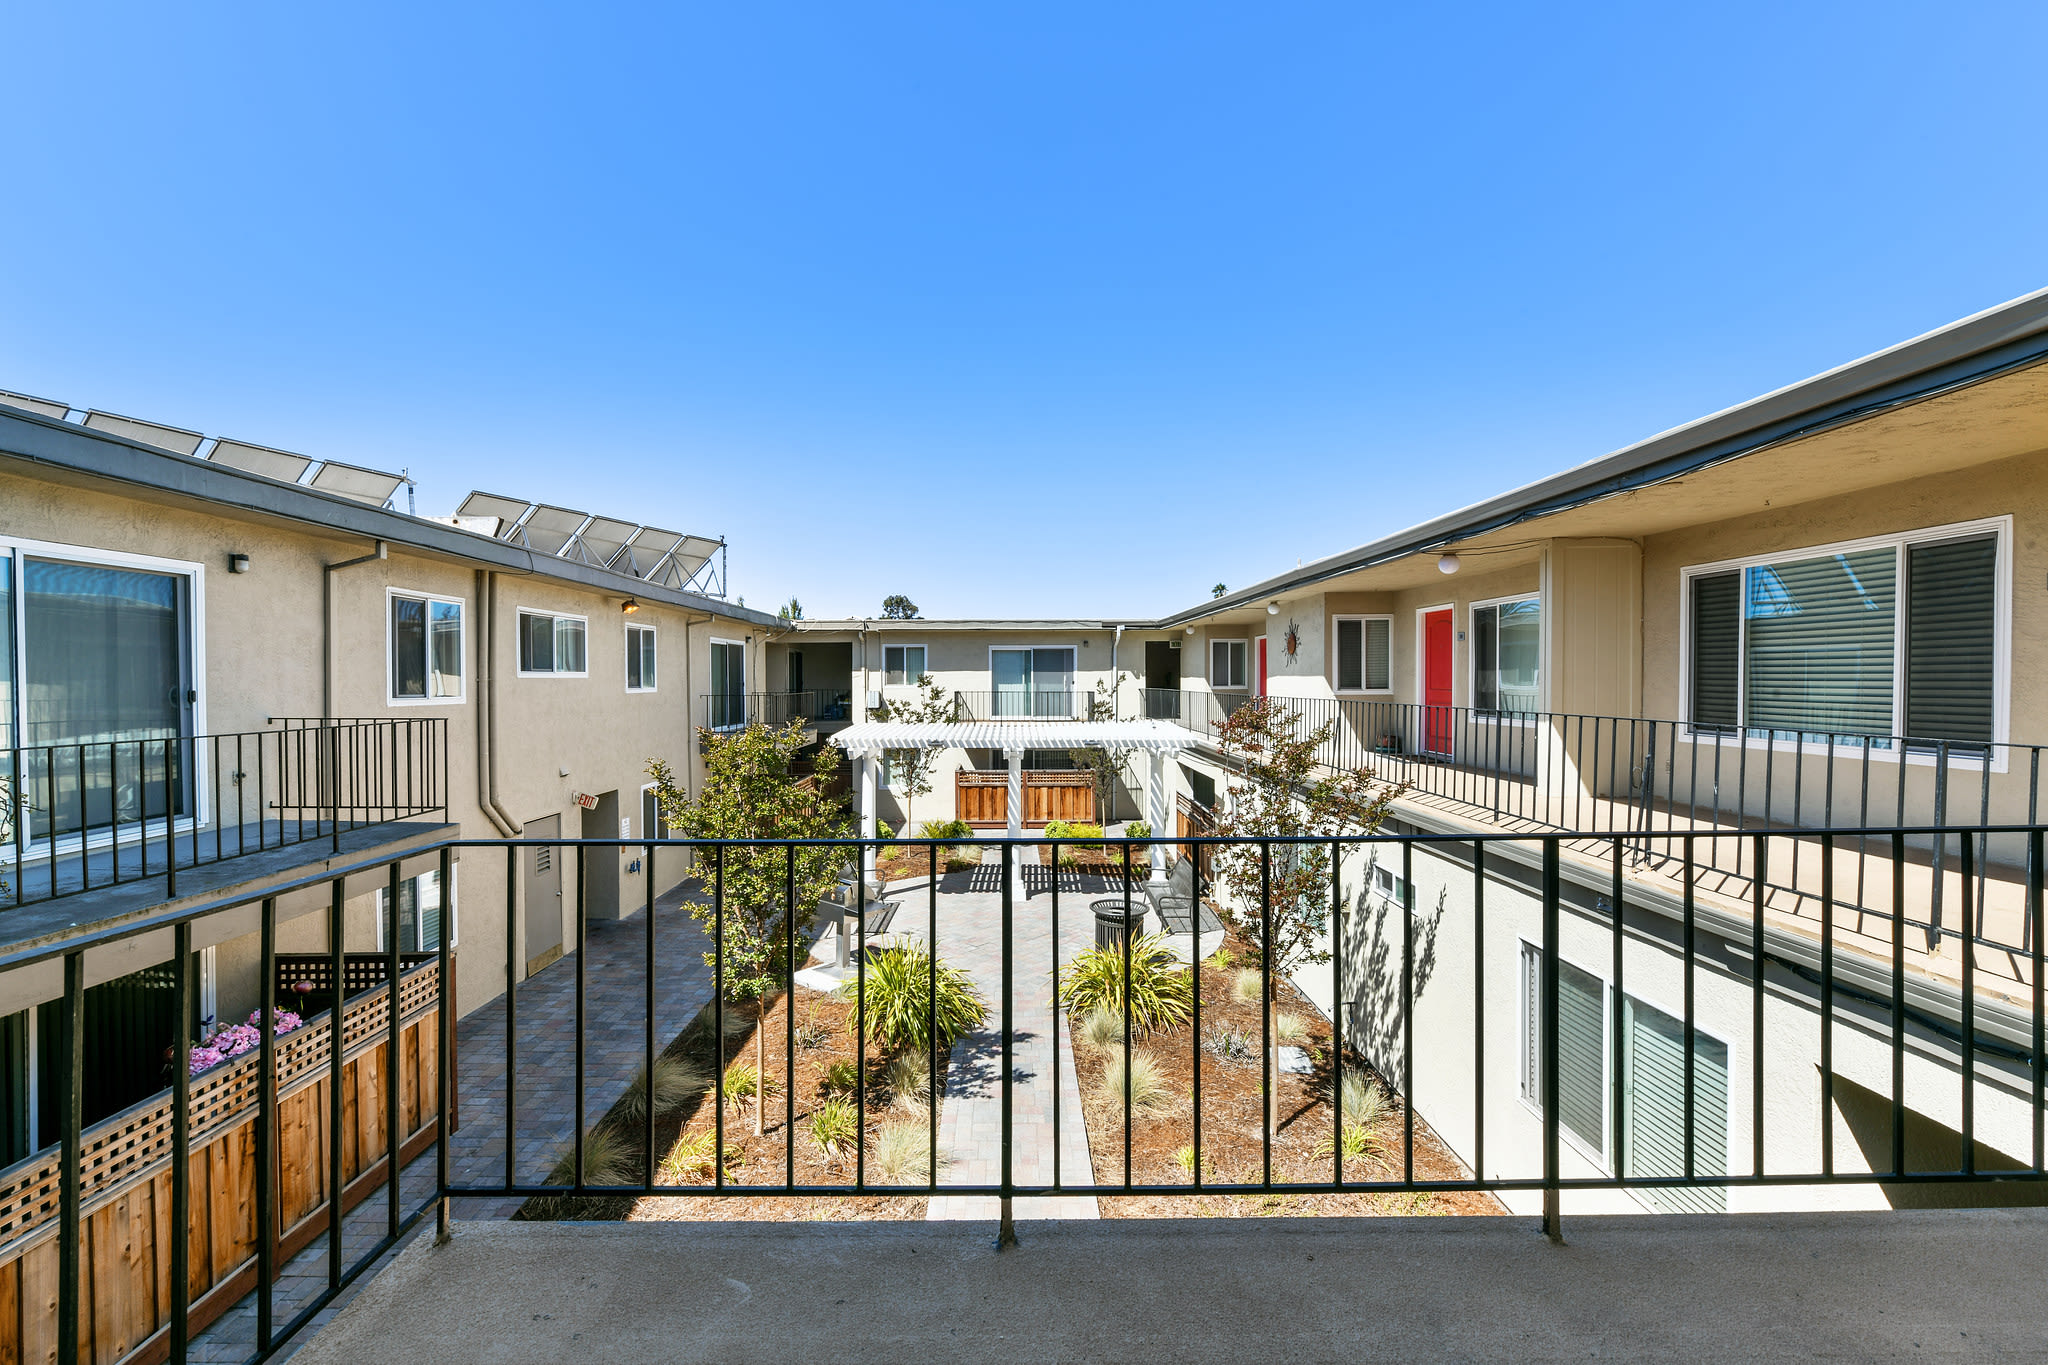 Patio overlooking the courtyard at Marina Haven Apartments in San Leandro, California